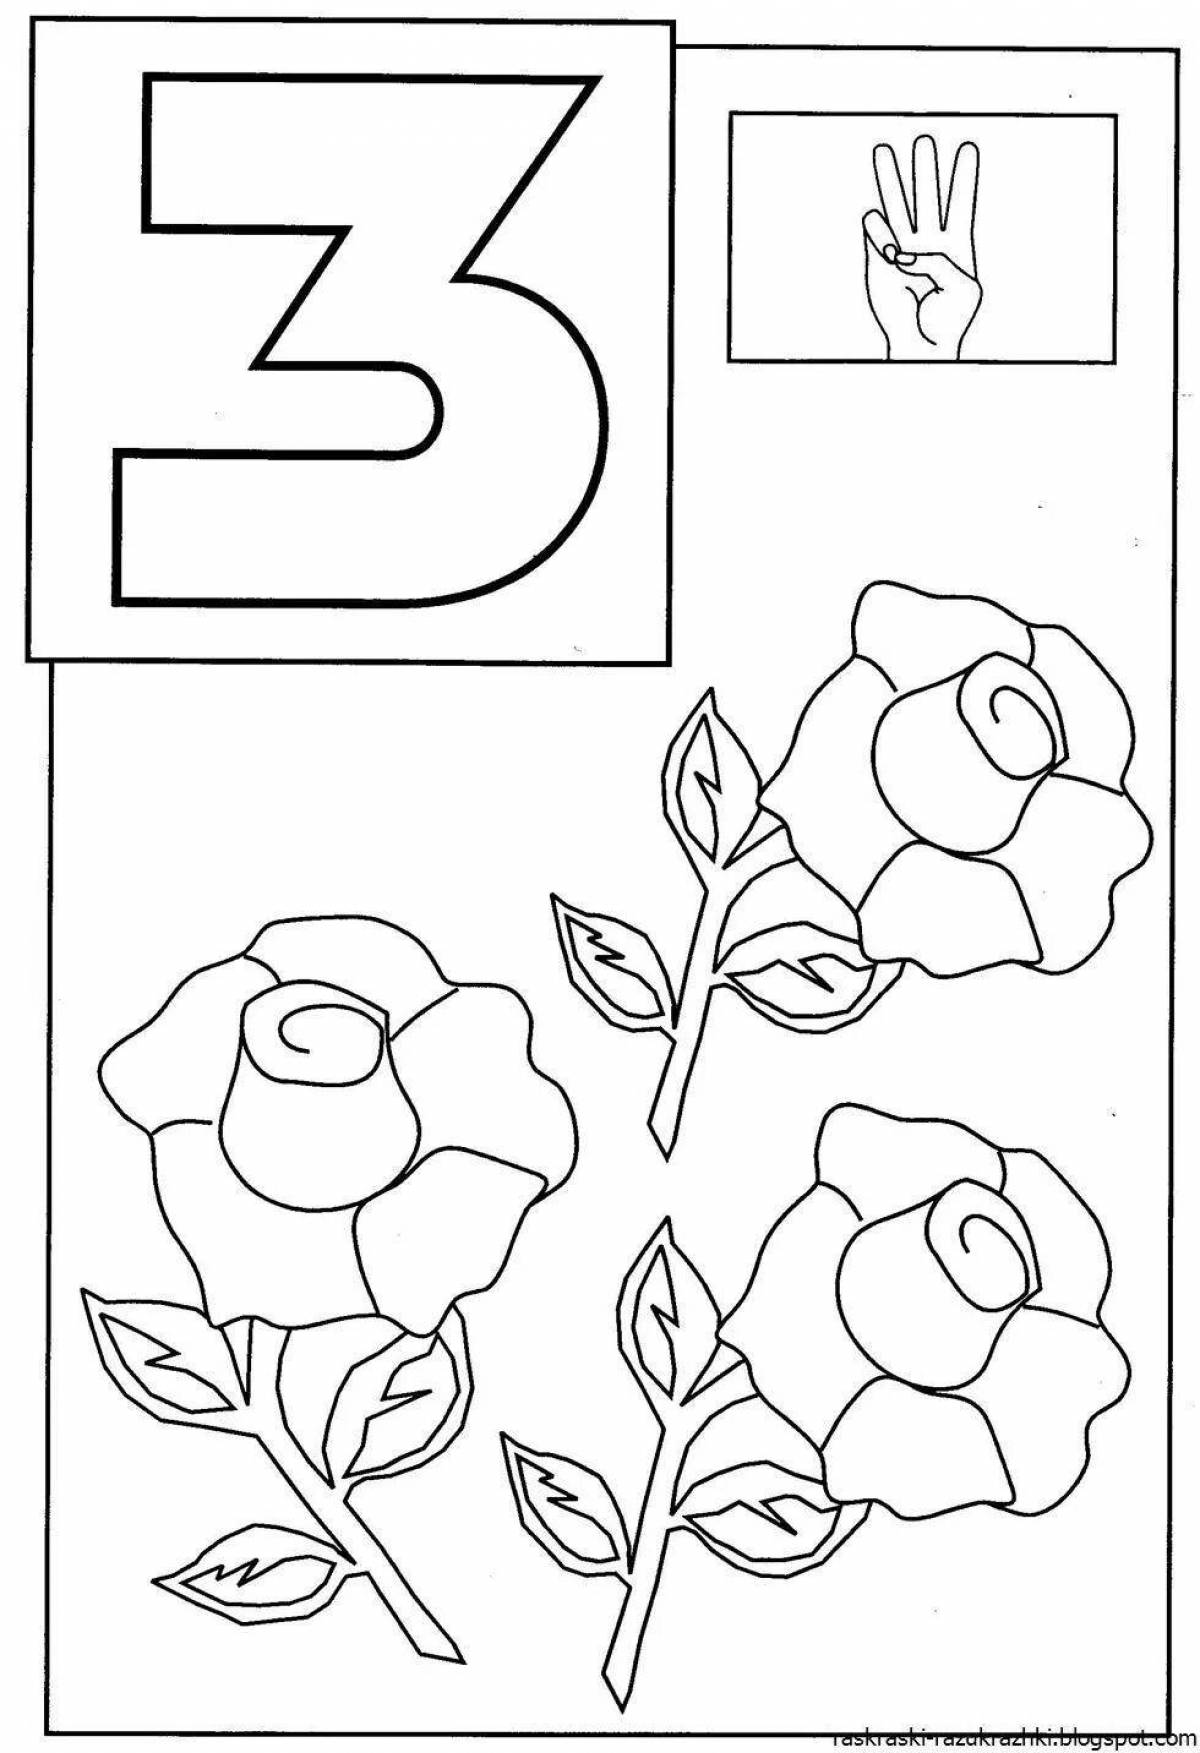 Colorful number 3 coloring book for preschoolers